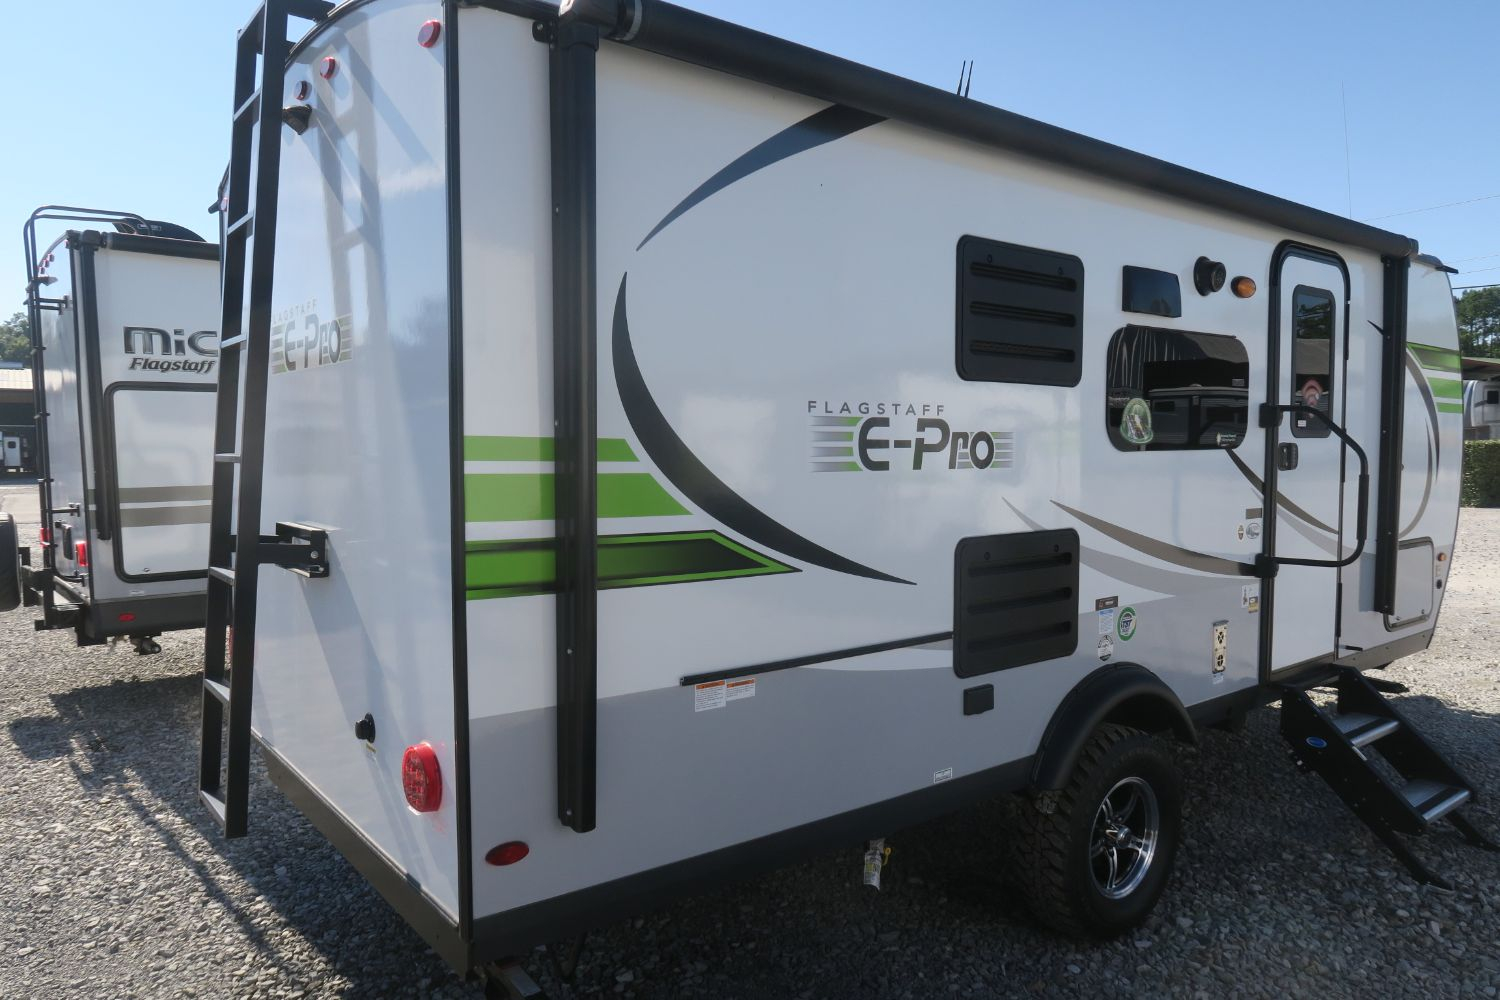 NEW 2020 FLAGSTAFF E-PRO 20BHS - Overview | Berryland Campers